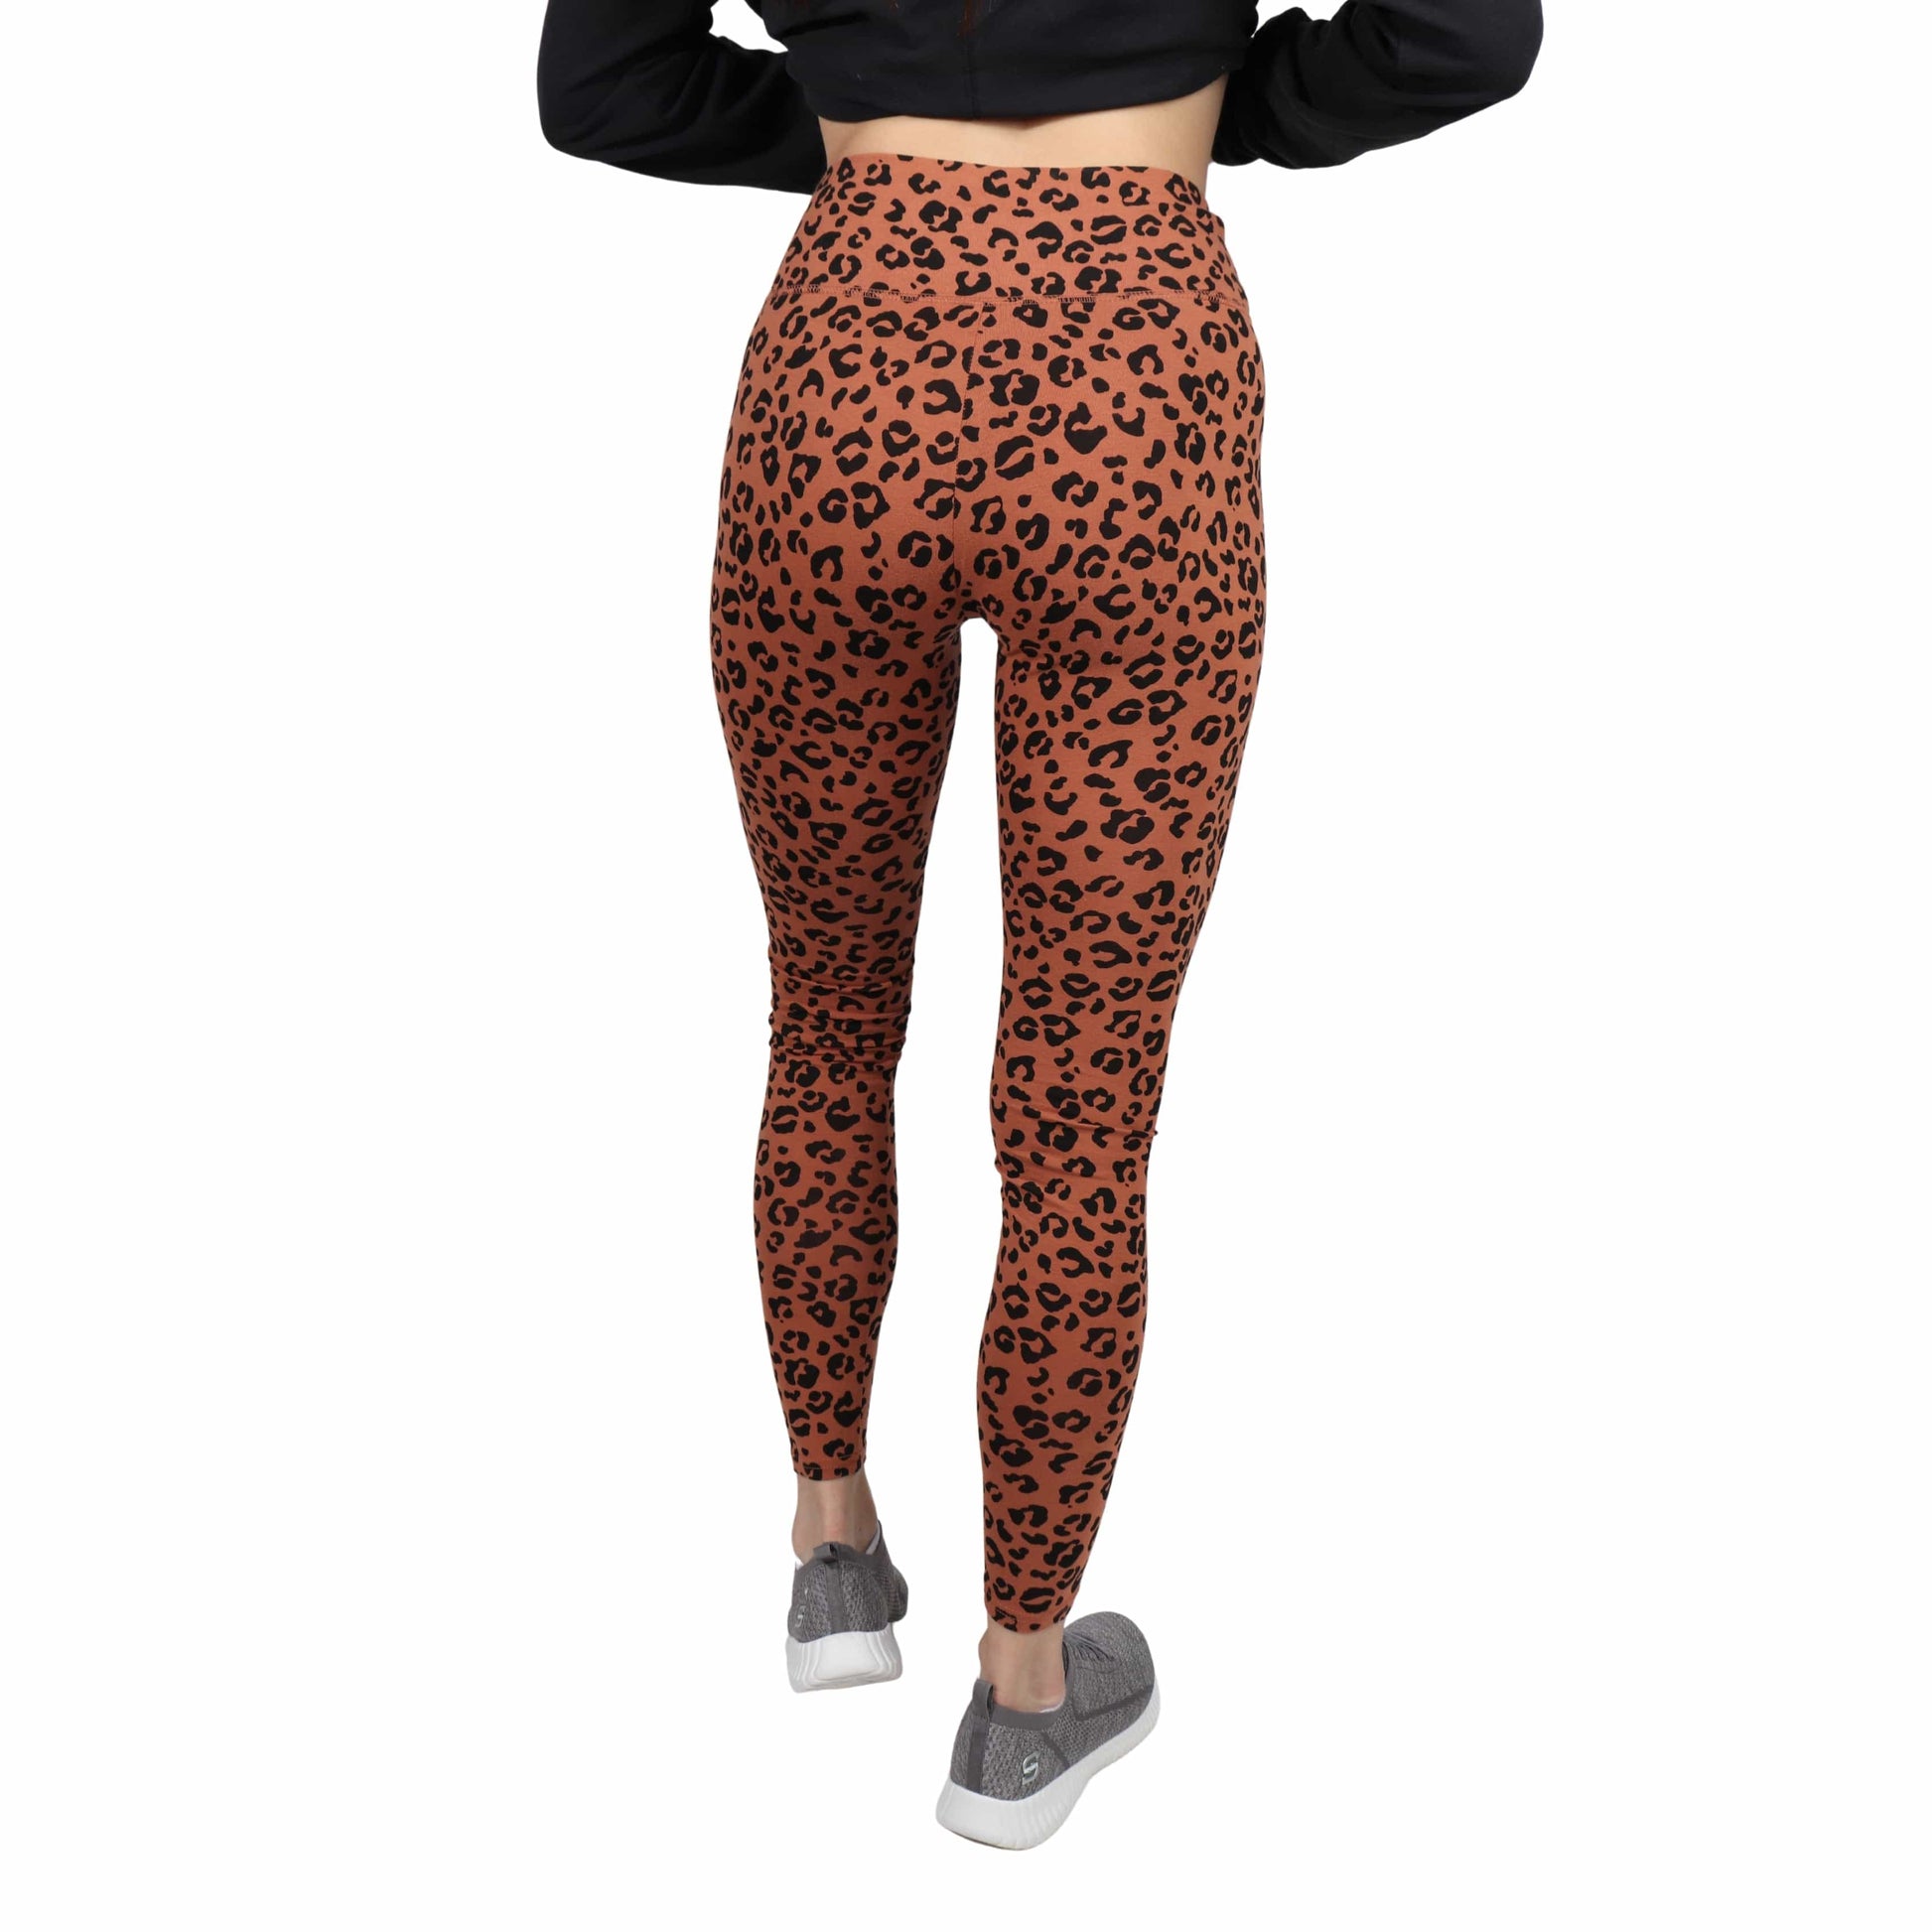 Women's Leopard Print High-Waisted Classic Leggings Wild Fable Size Small